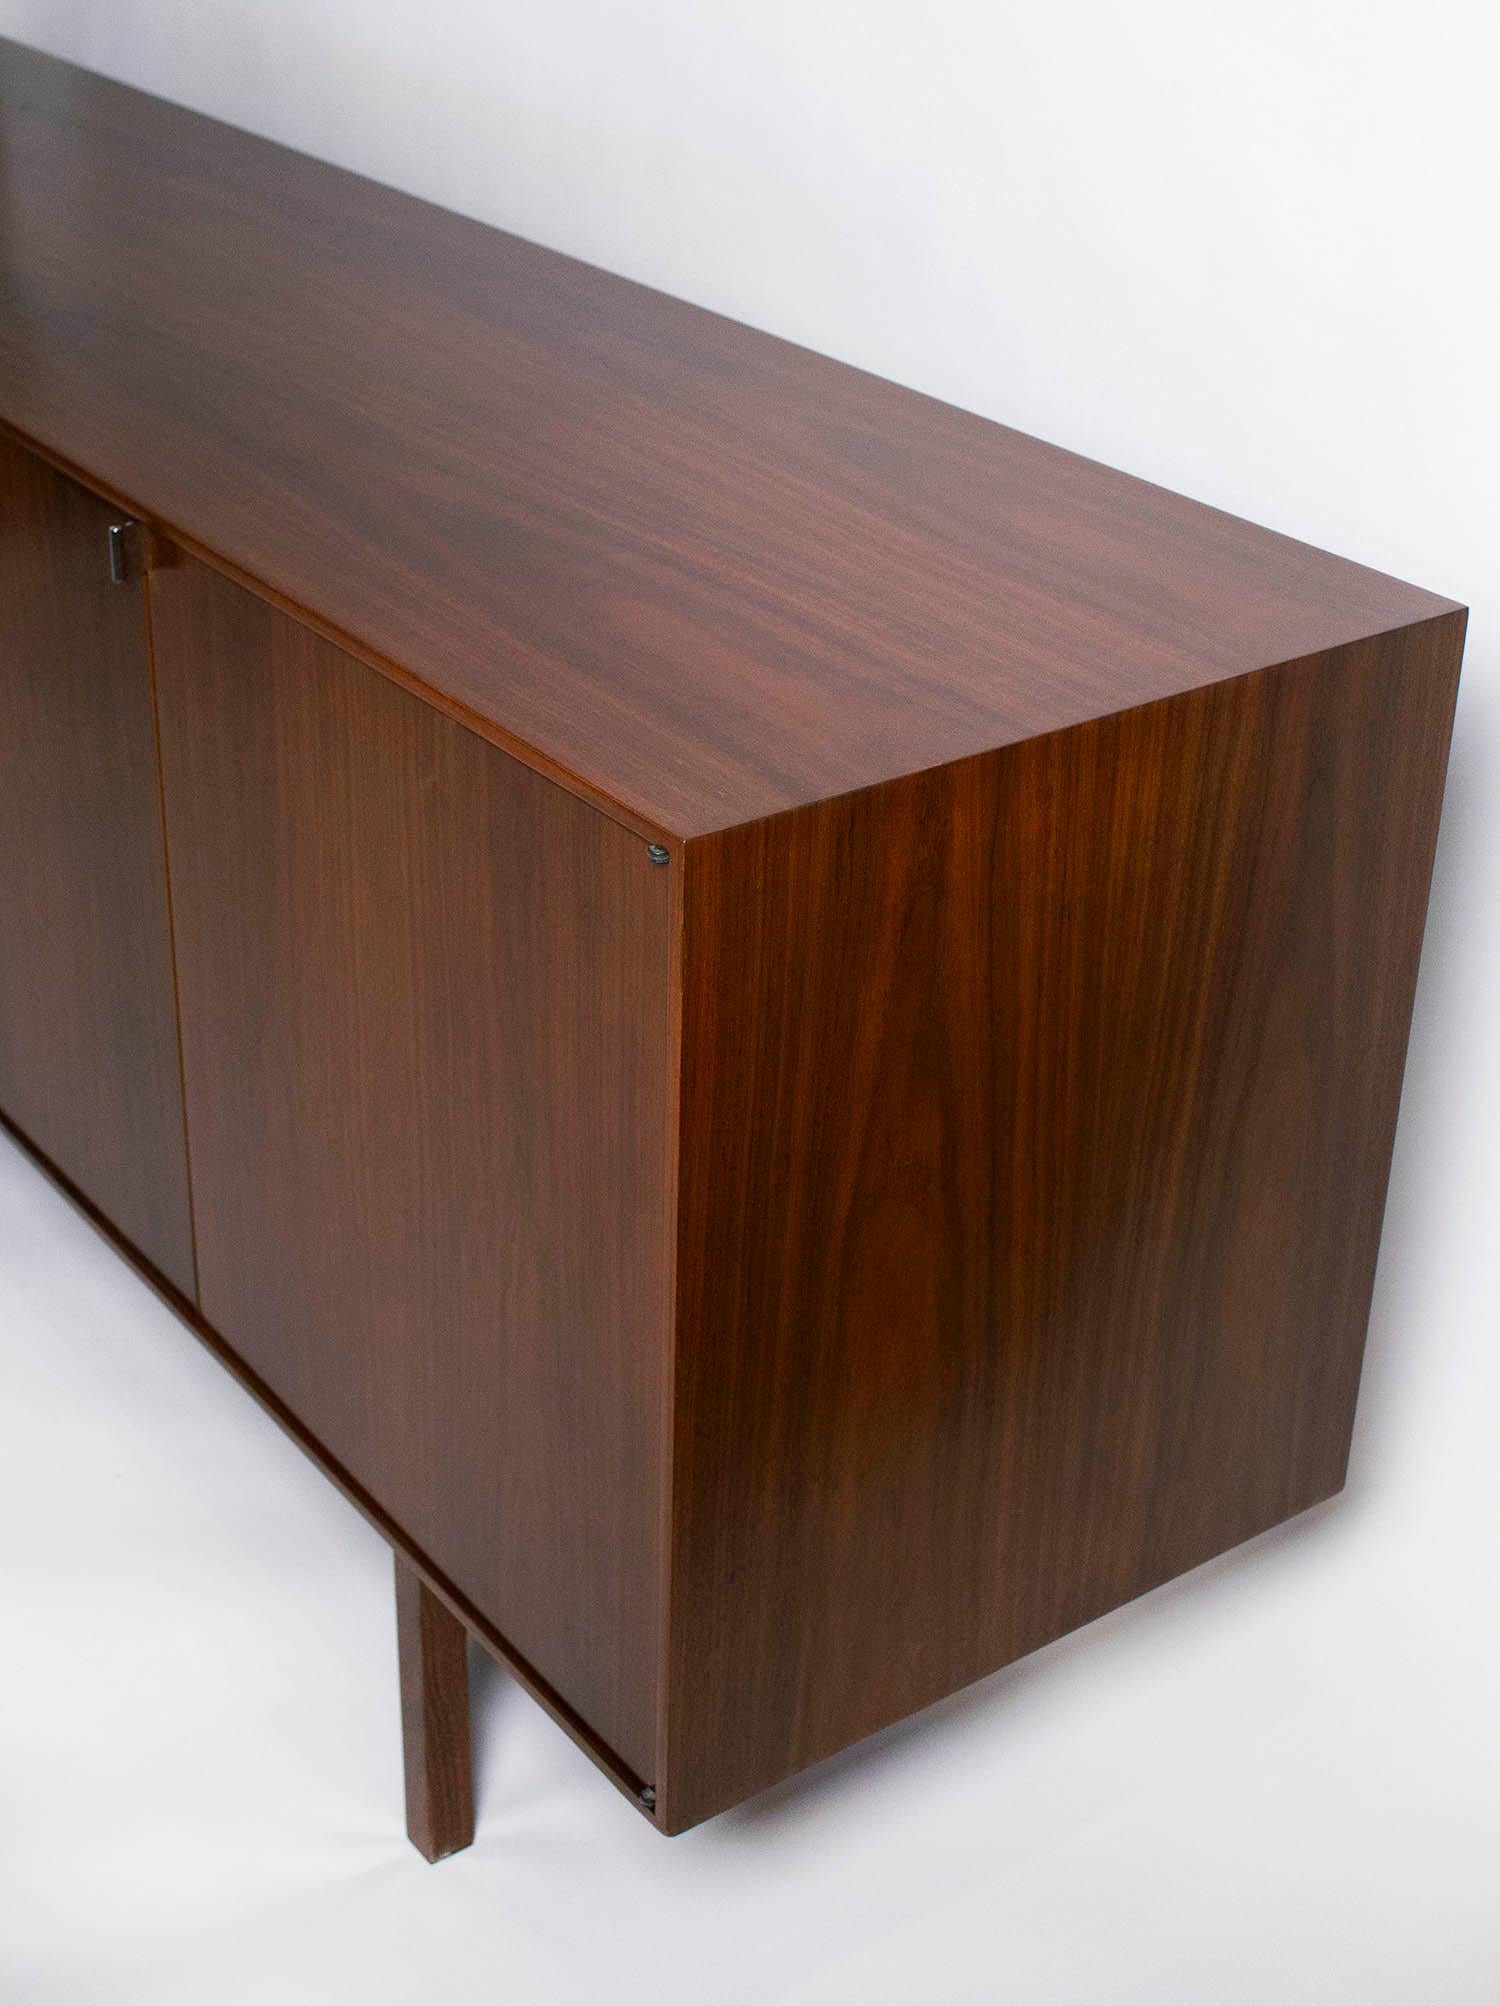 20th Century 1950s Florence Knoll Cabinet in Walnut with Maple Interior Model No. 541